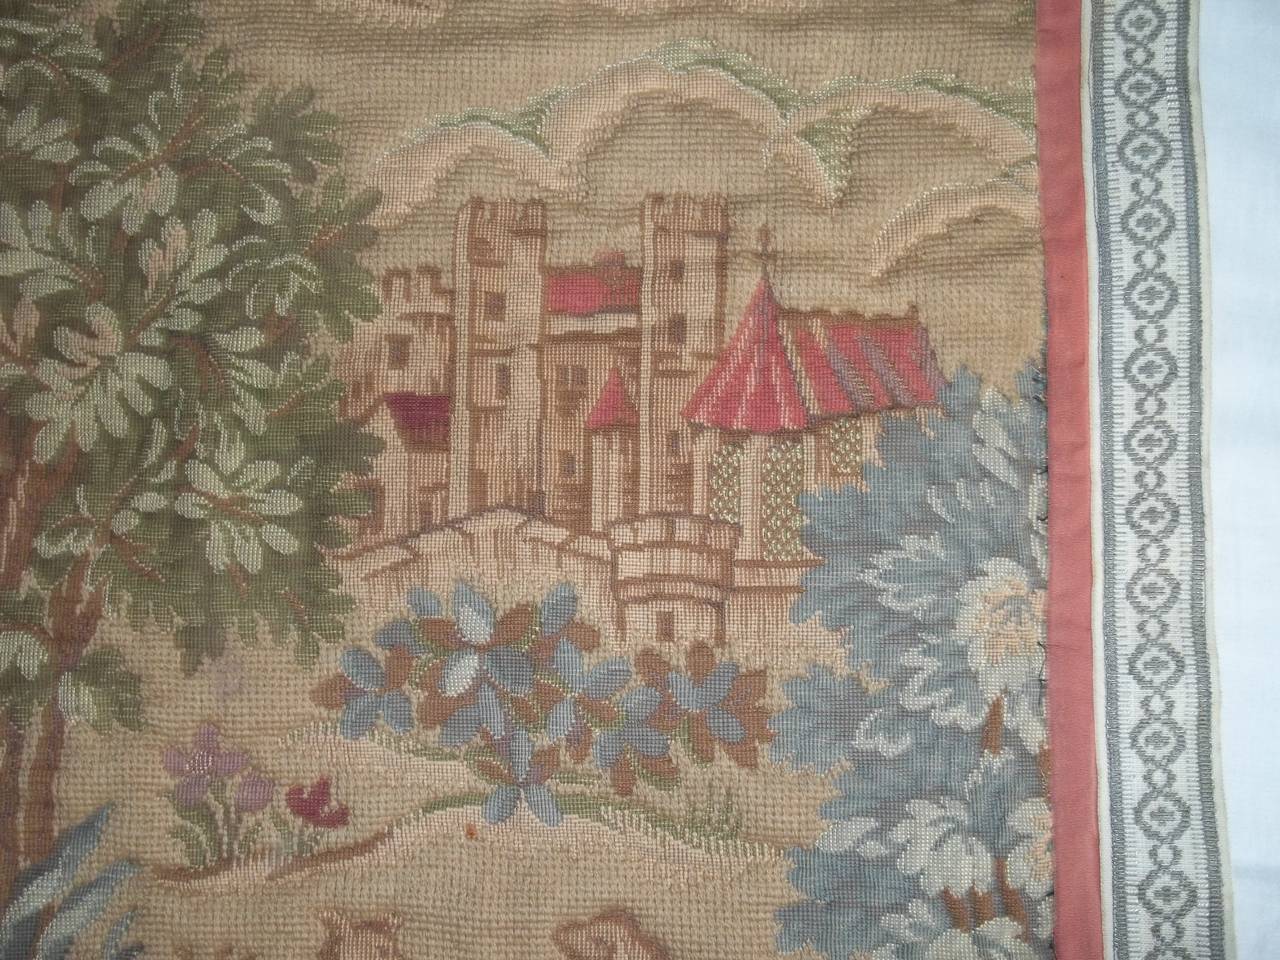 Woven Mid-19th Century Large Antique Tapestry Aubusson Style, French, circa 1850